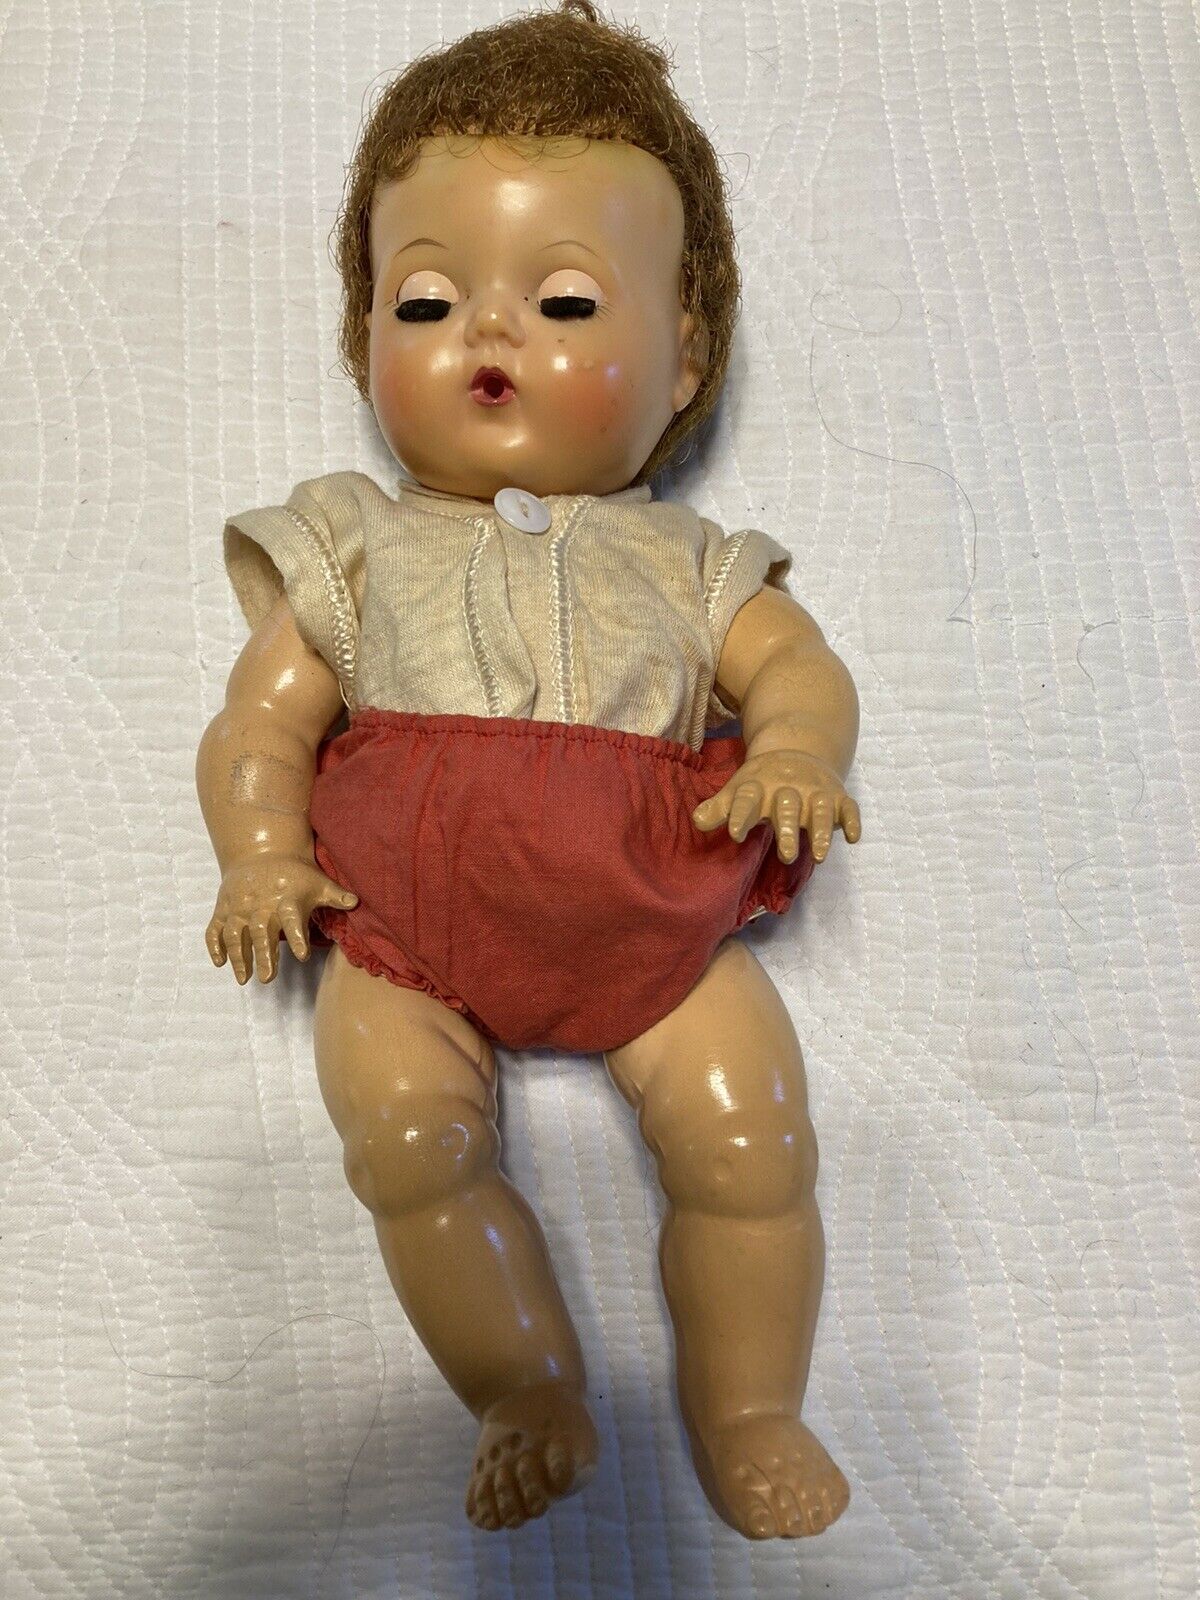 Vintage 1950's American Character Tiny Tears Doll Pat No 2675644 Posable